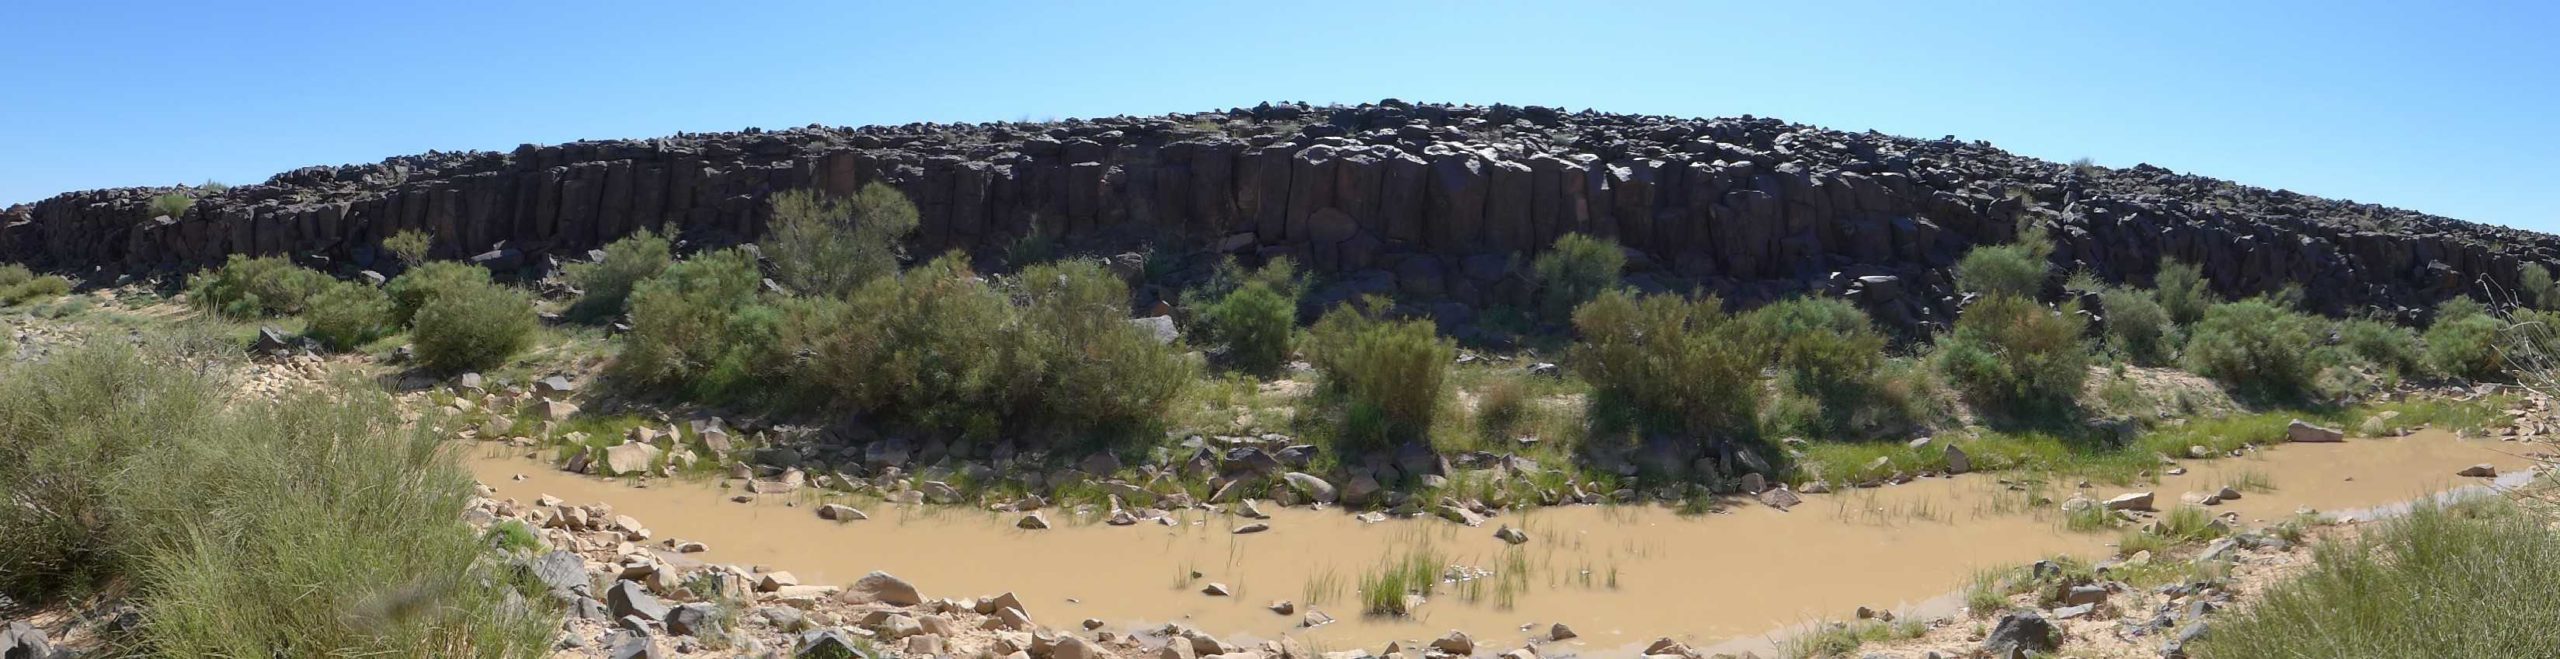 Panoramic view of the basalt cliffs perched above Wadi Hassan, pooled with water from the winter rains. Nearly every panel along the cliff face is carved with some form of rock art. Photo by C.D. Allen.